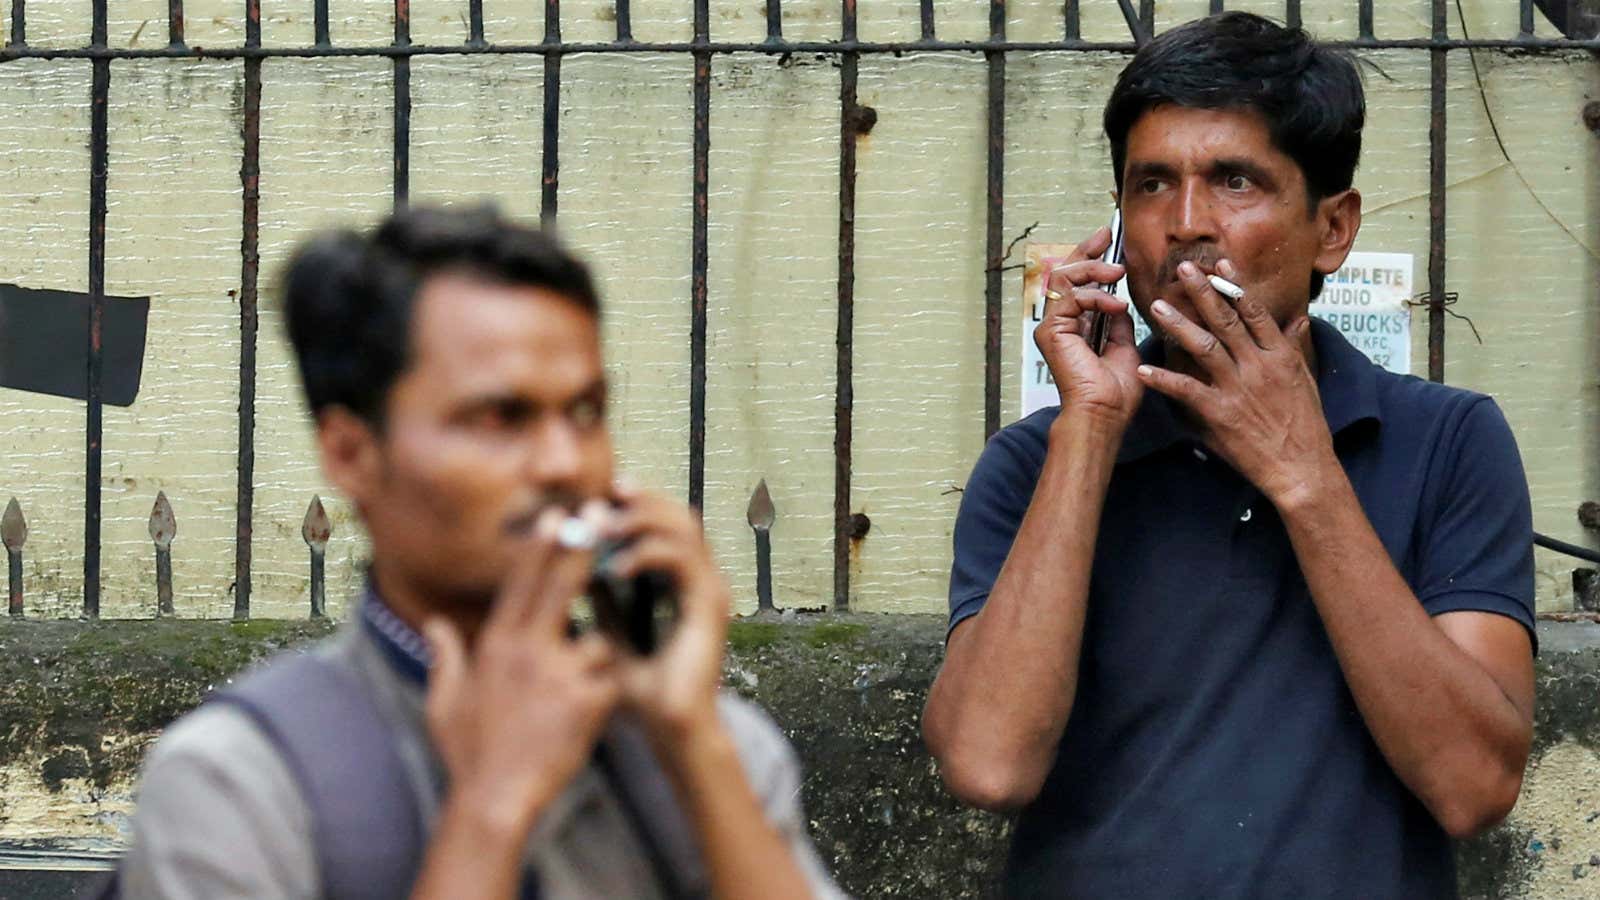 Over 260 million Indians use tobacco.